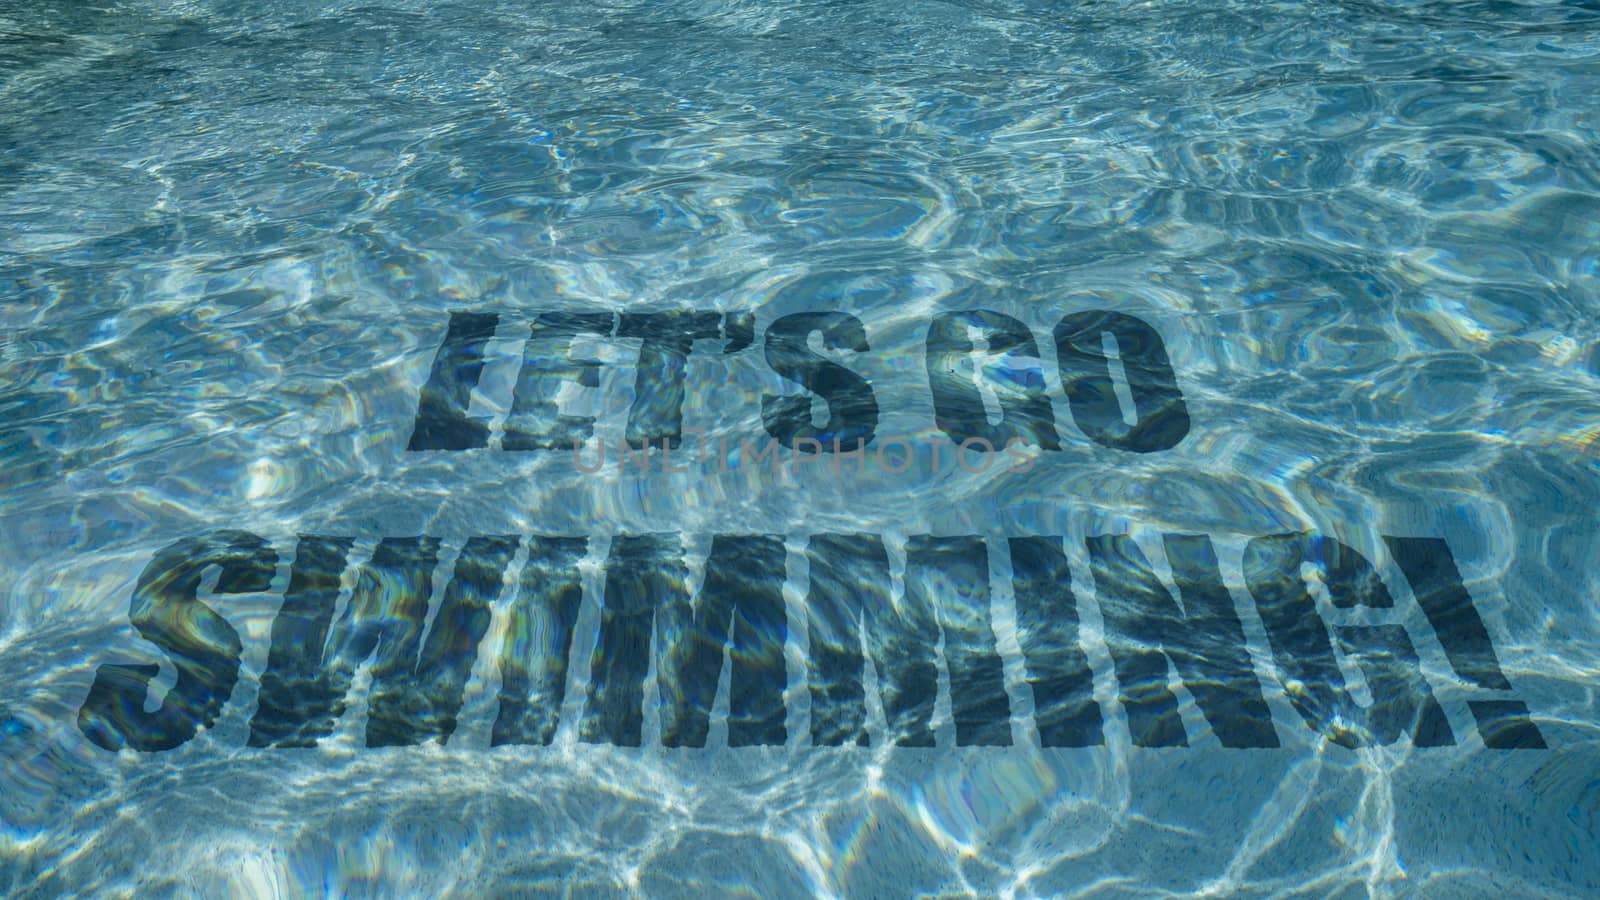 Let's go swimming text appearing under water in a swimming pool
